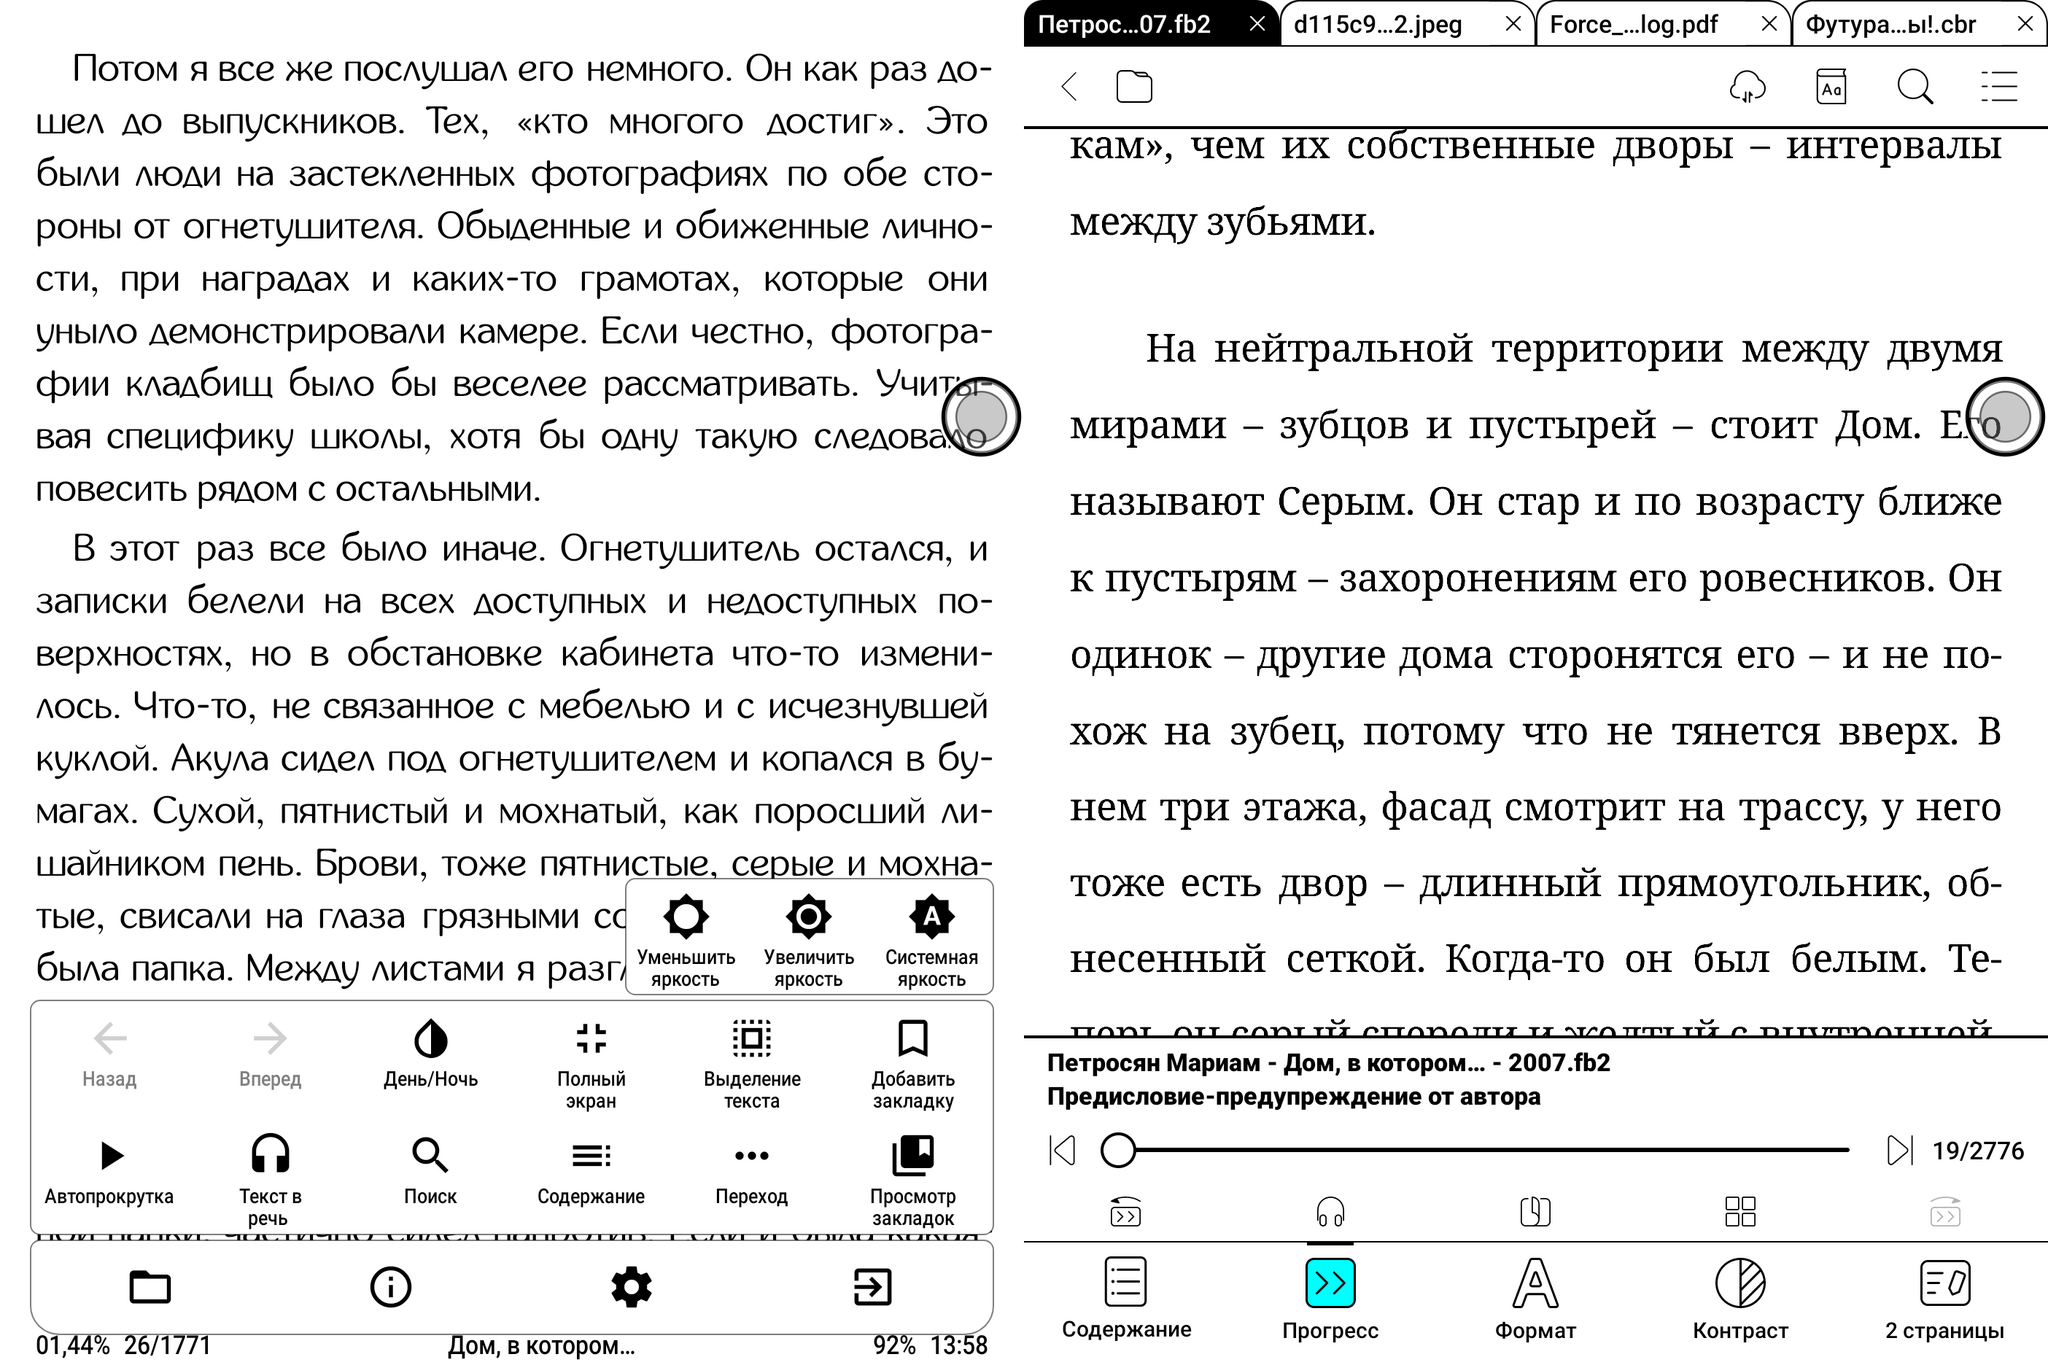 E-Ink color reader – Onyx Boox Faraday. Review - My, Electronics, Reader, E-books, Гаджеты, e-Ink, Onyx boox, Overview, Longpost